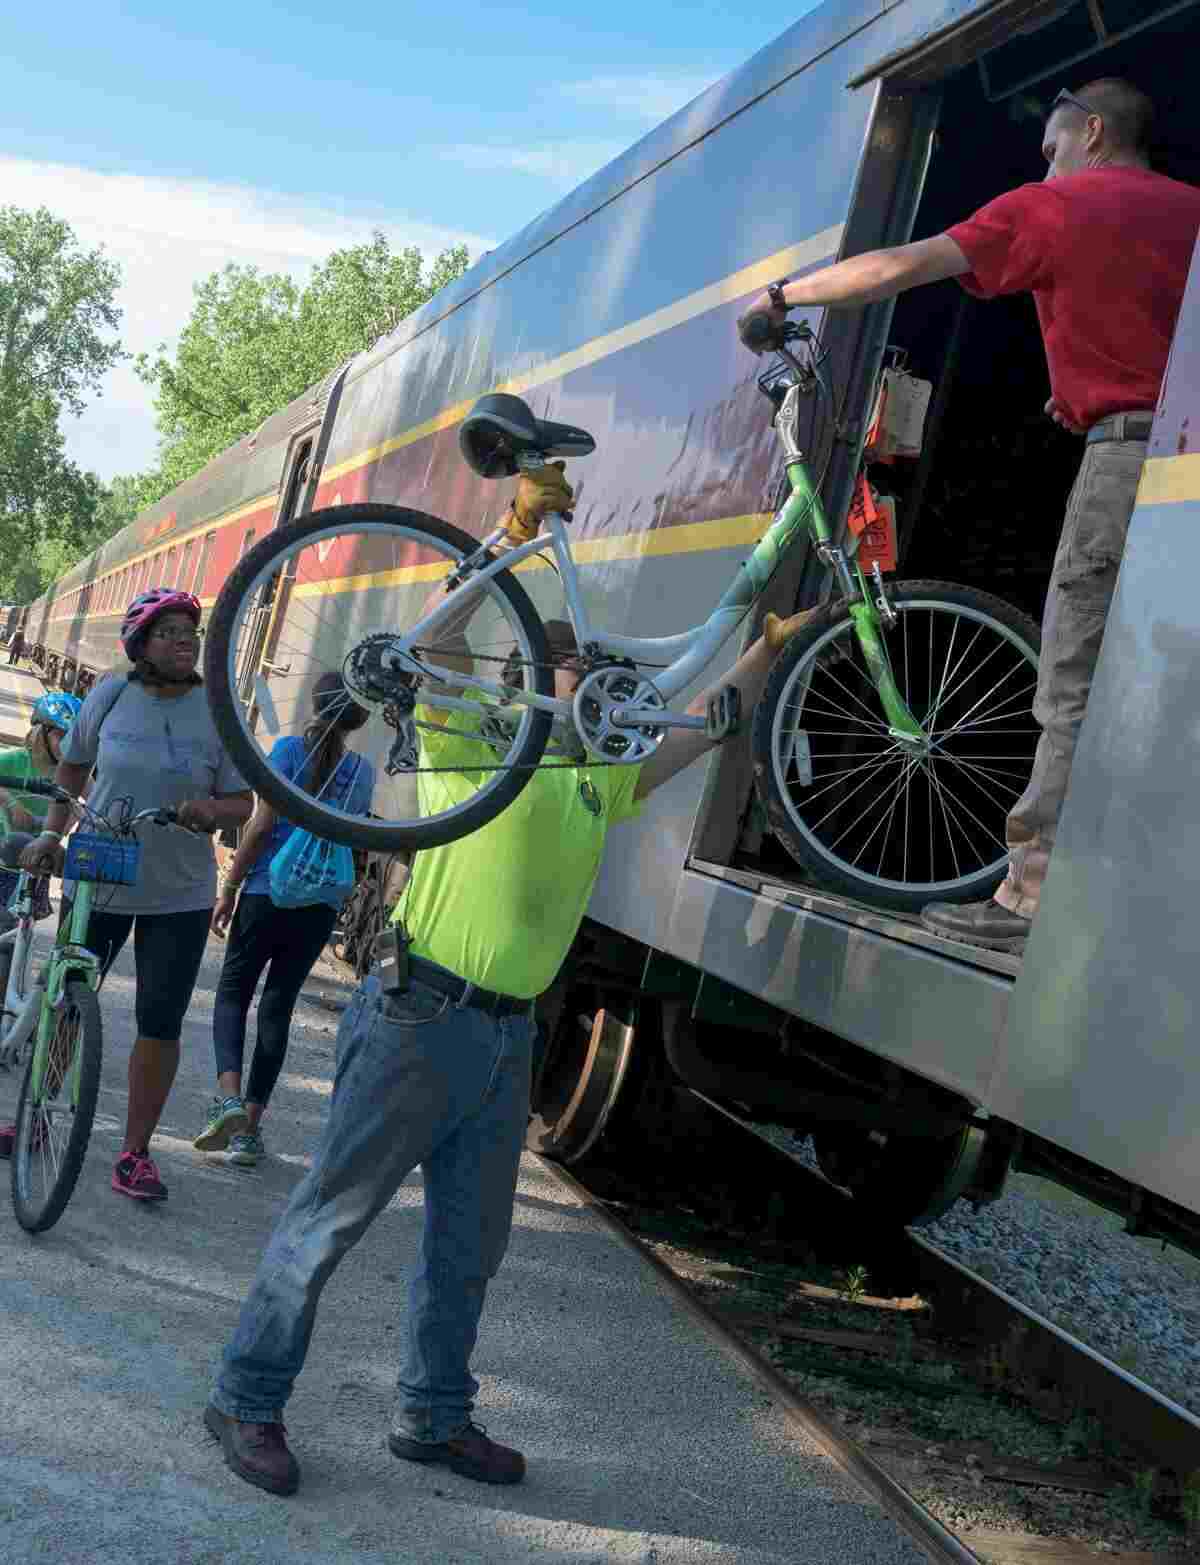 Loading bicycles for Bike Aboard!